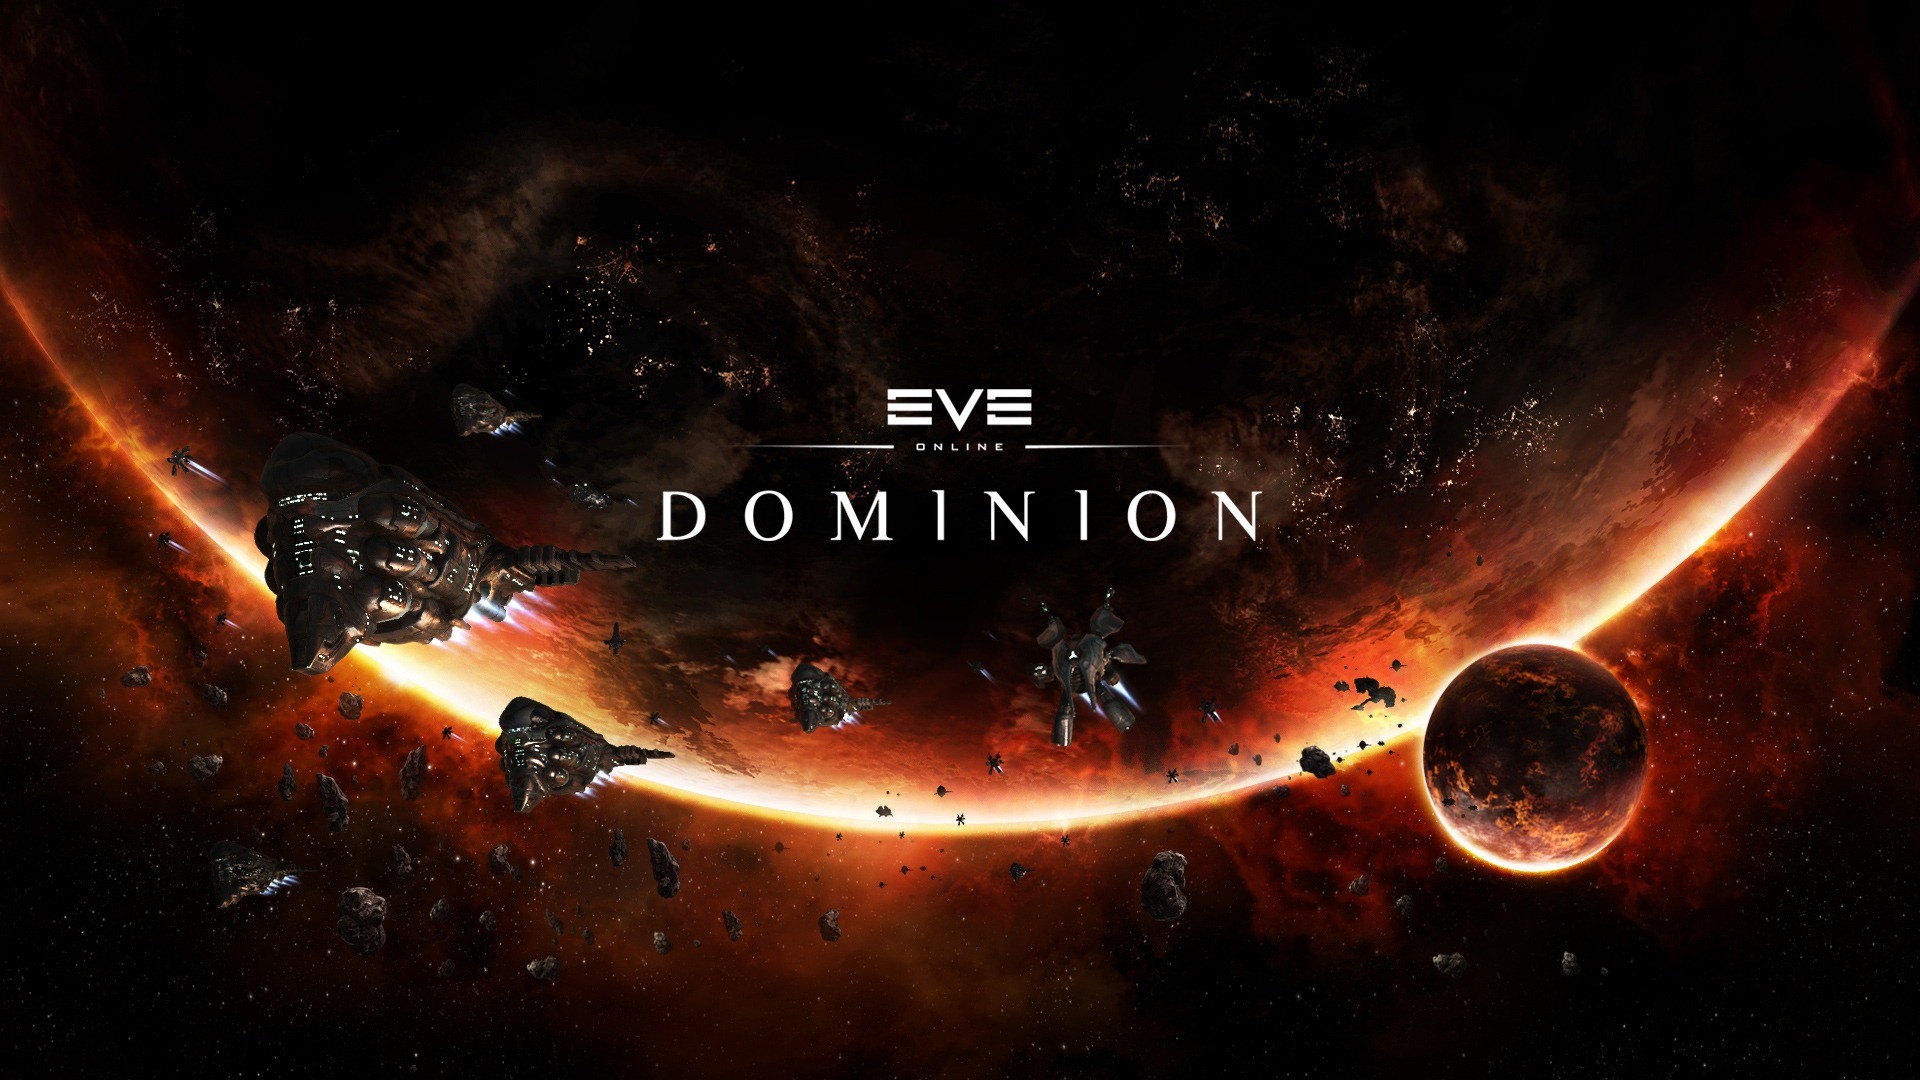 1920x1080 eve online dominion wallpaper online games games wallpapers